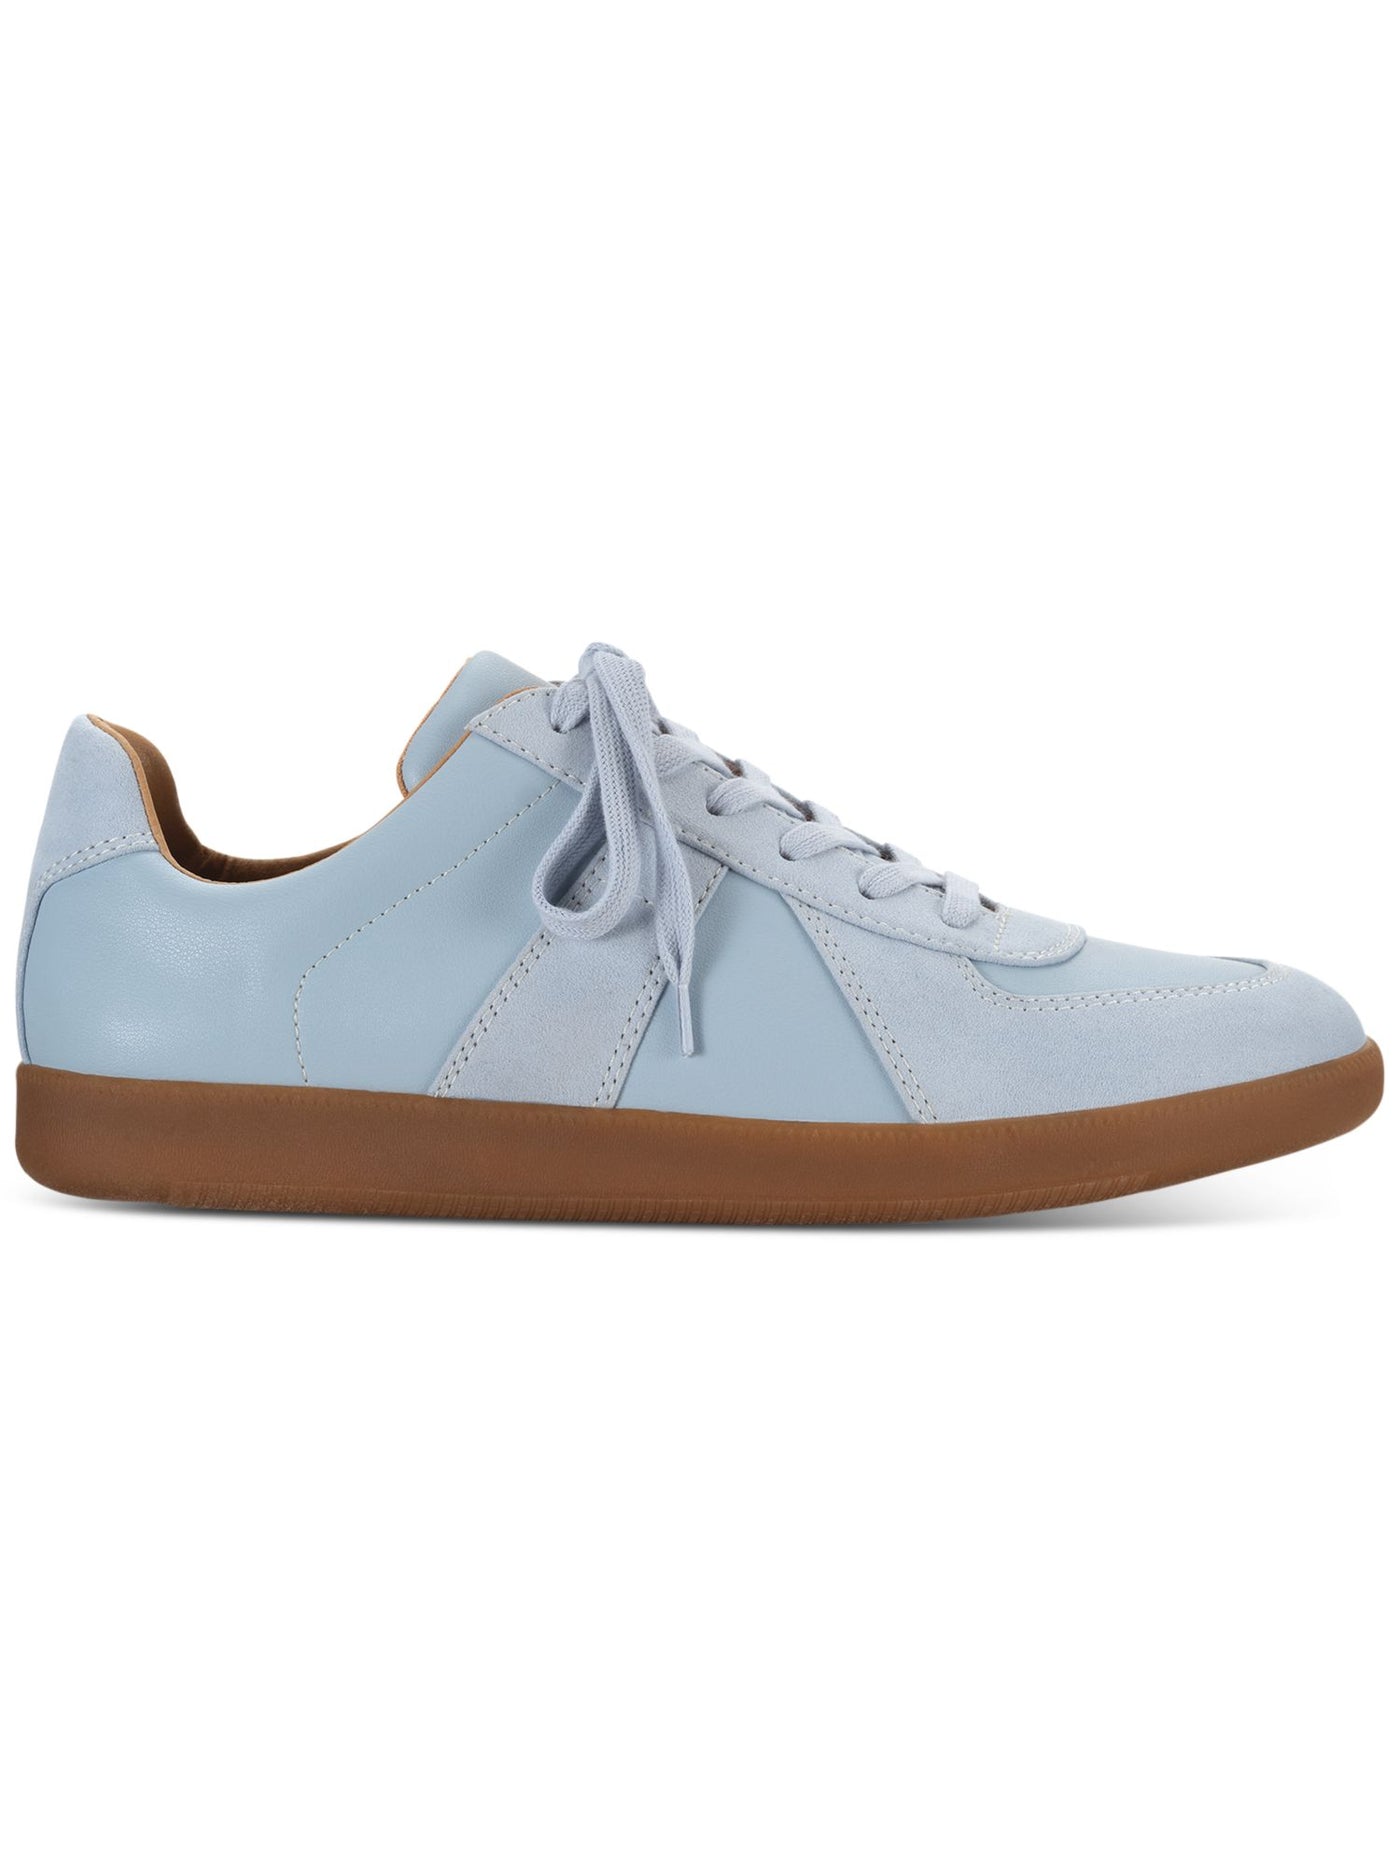 INC Mens Light Blue Padded Harlan Round Toe Platform Lace-Up Athletic Sneakers Shoes 11 M